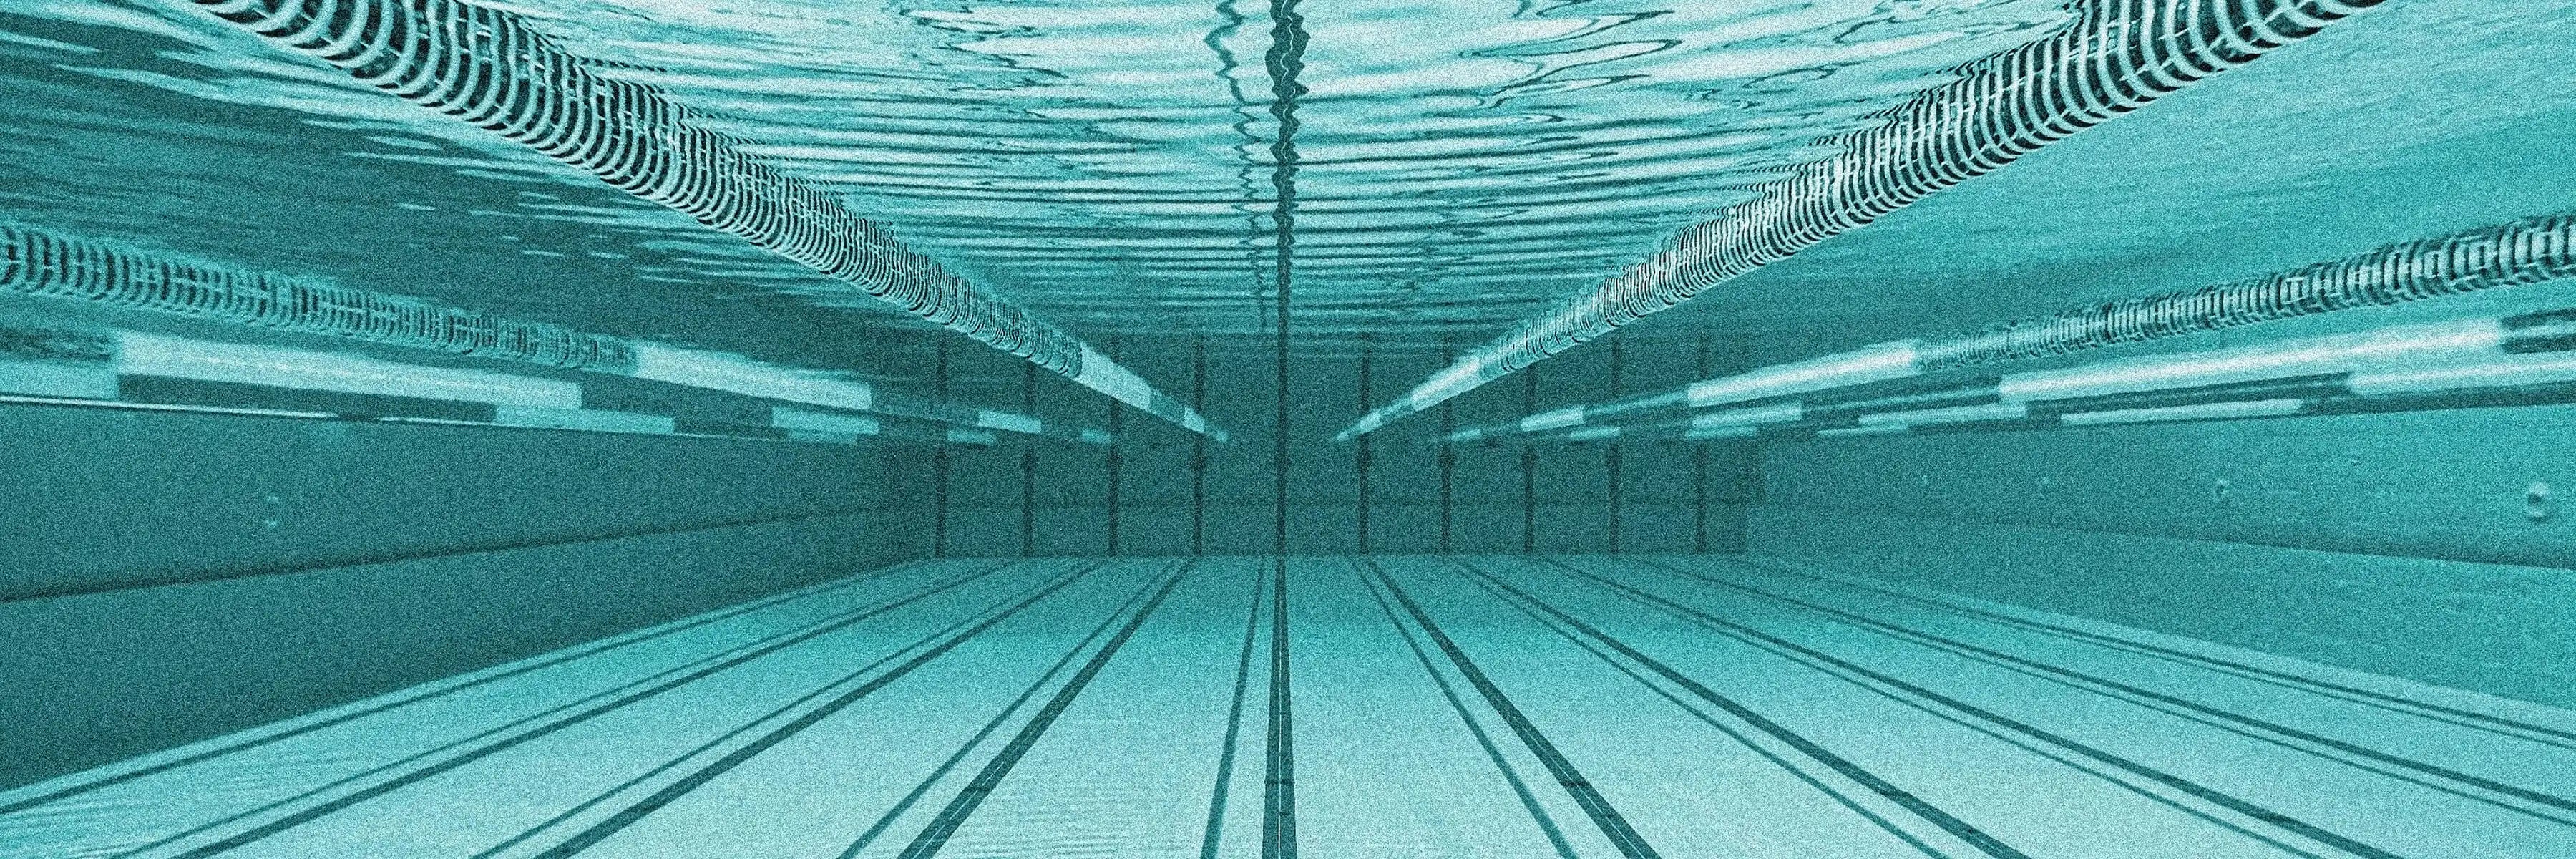 grainy, artistic, underwater photo of an olympic swimming pool